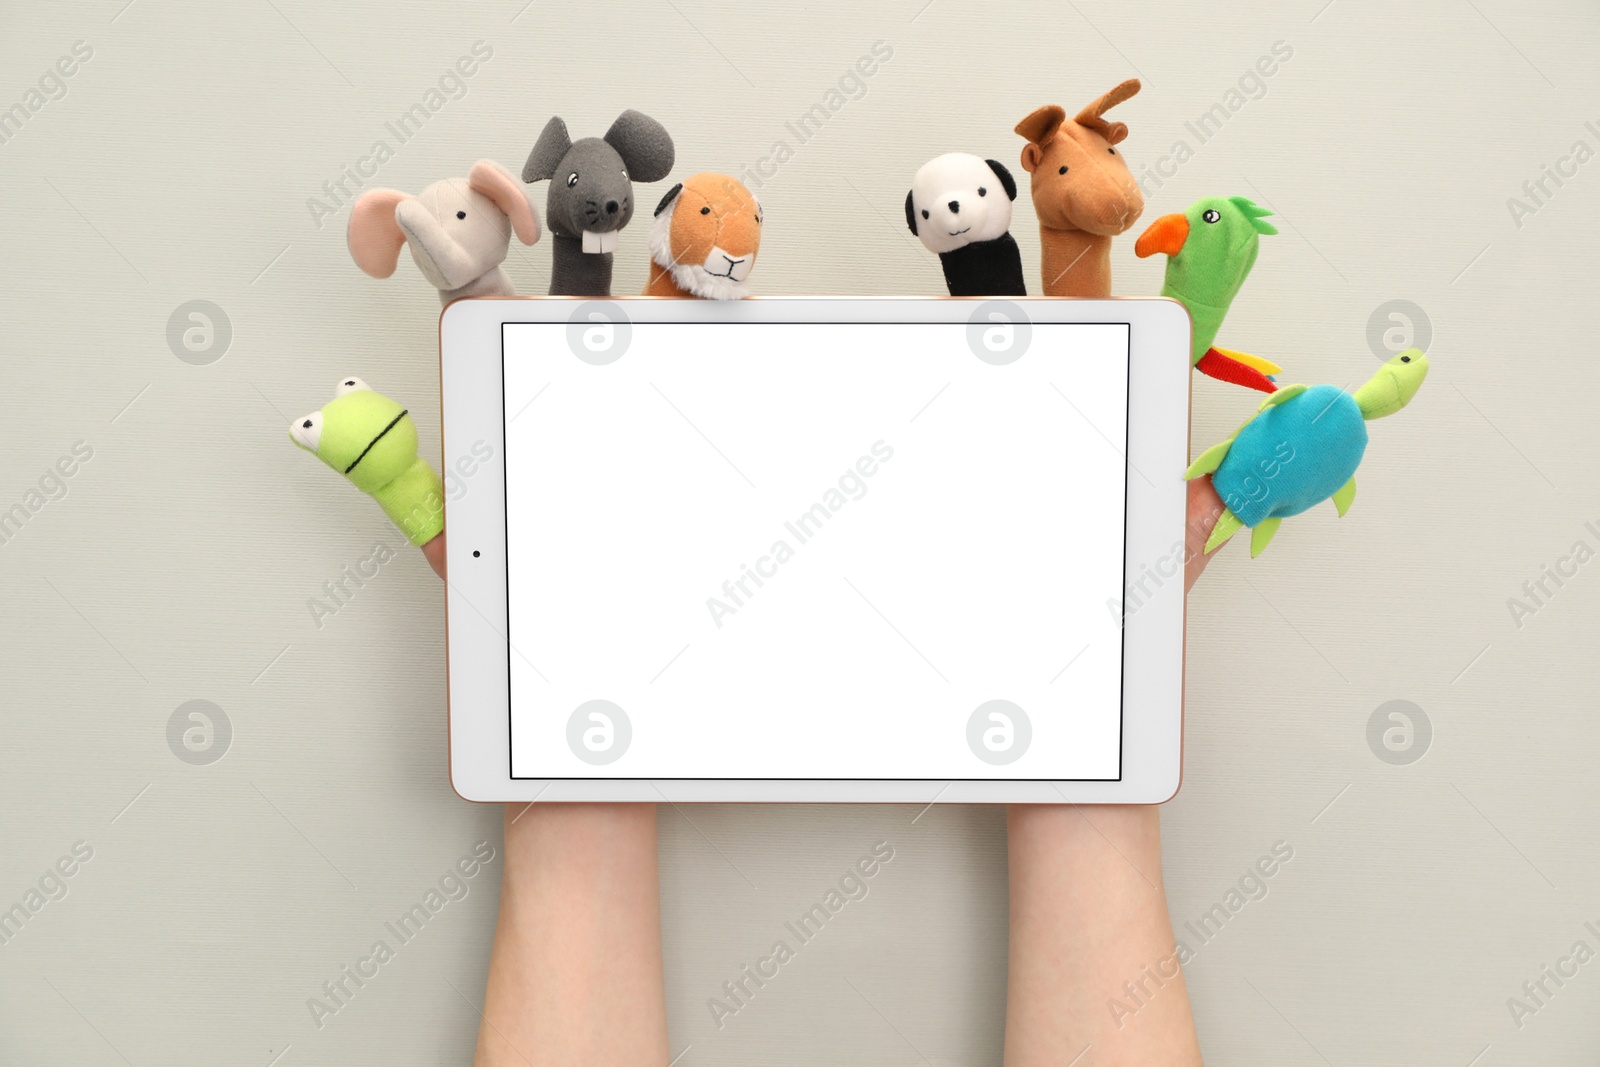 Photo of Person with animal puppets on fingers holding tablet against light background, closeup. Space for text